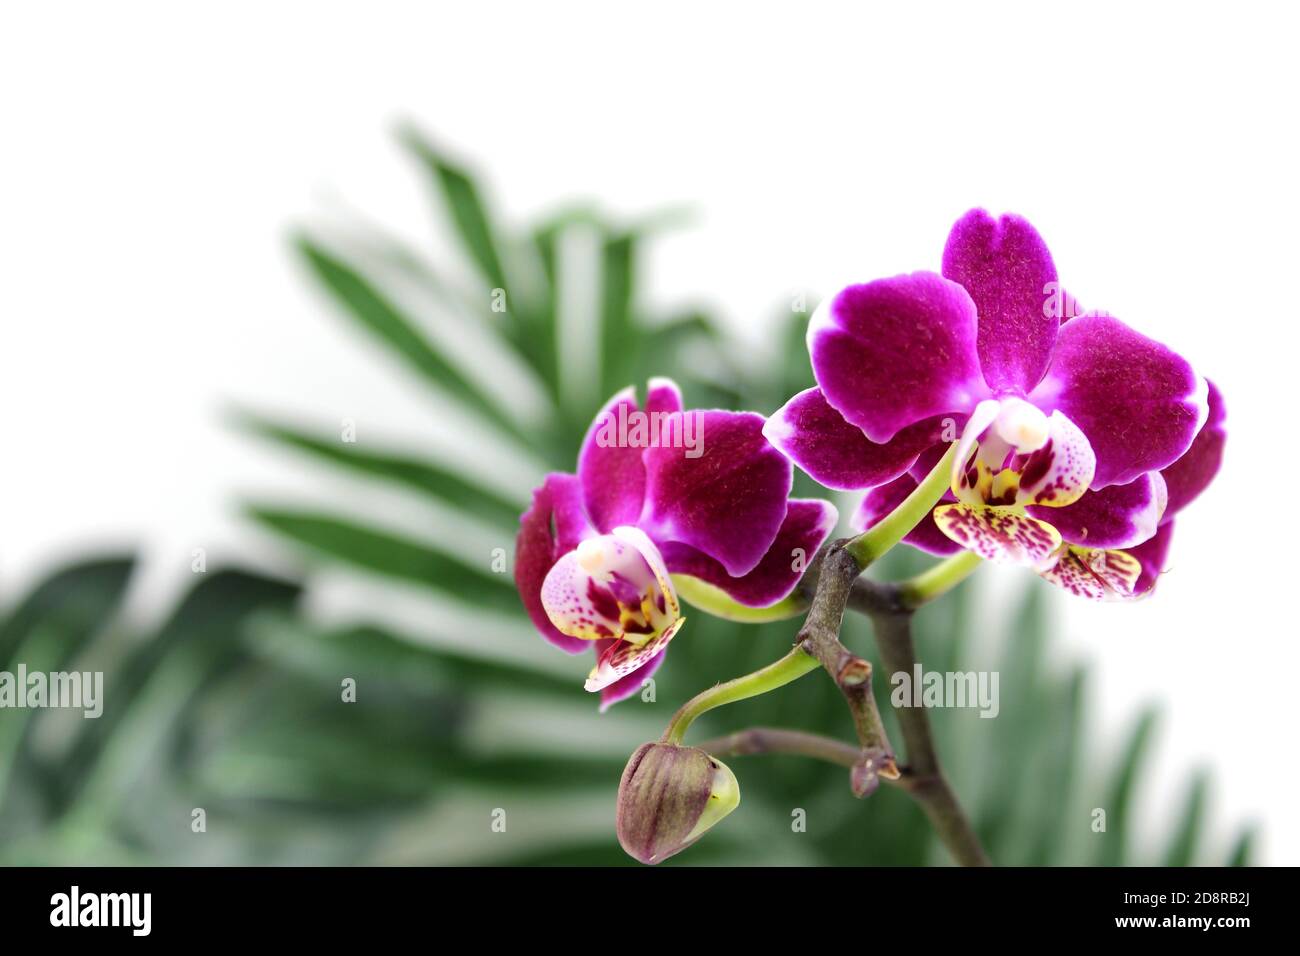 Purple orchid flower phalaenopsis, phalaenopsis or falah on a white background. Purple phalaenopsis flowers on the right. known as butterfly orchids. Stock Photo